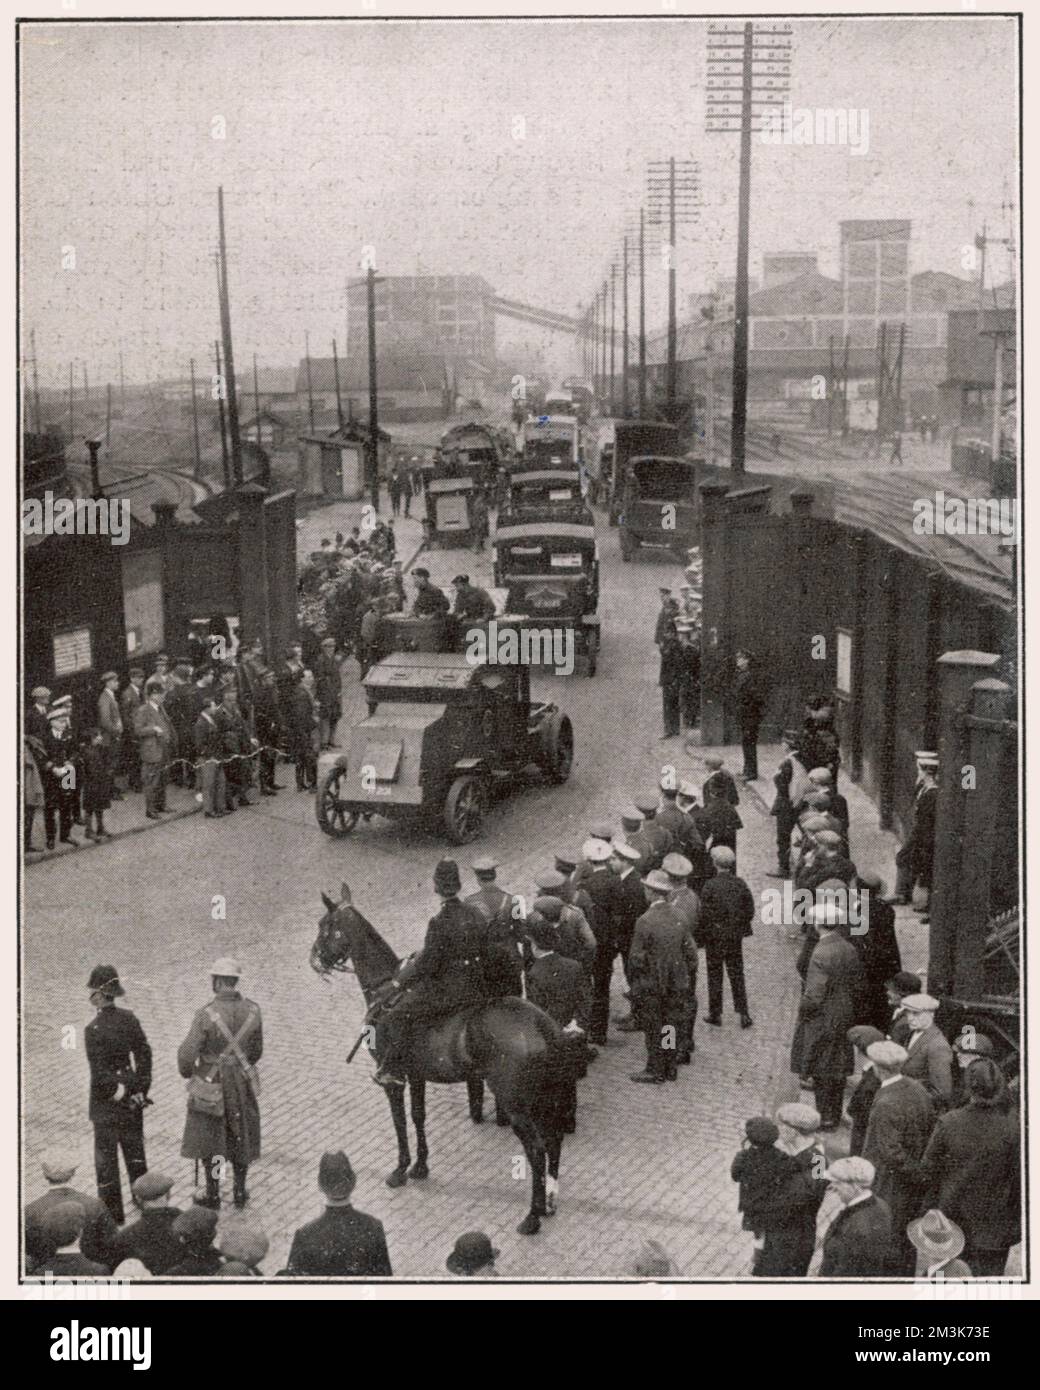 The last food convoy to leave the Royal Albert Docks before the termination of the General Strike. In support of a strike by coal miners over the issue of threatened wage cuts, the Trades Union Congress called a General Strike in early May 1926. The strike only involved certain key industrial sectors (docks, electricity, gas, railways) but, in the face of well-organised government emergency measures and lack of real public support, it collapsed after nine days.  May 1926 Stock Photo